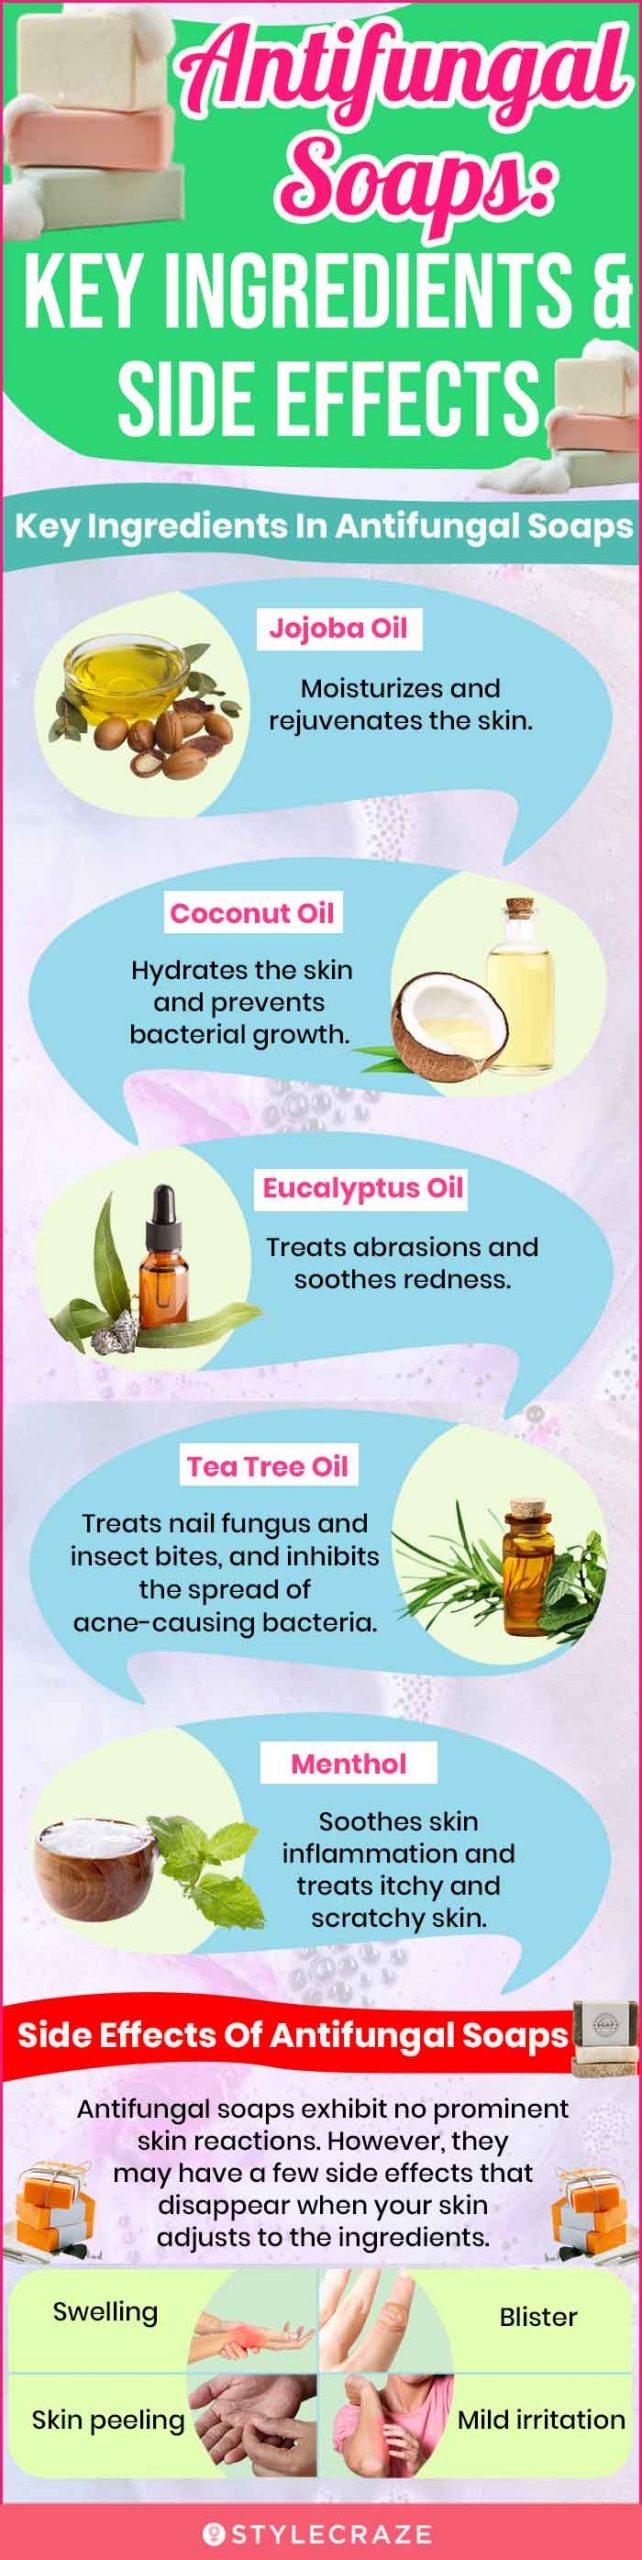 Antifungal Soaps: Key Ingredients & Side Effects (infographic)